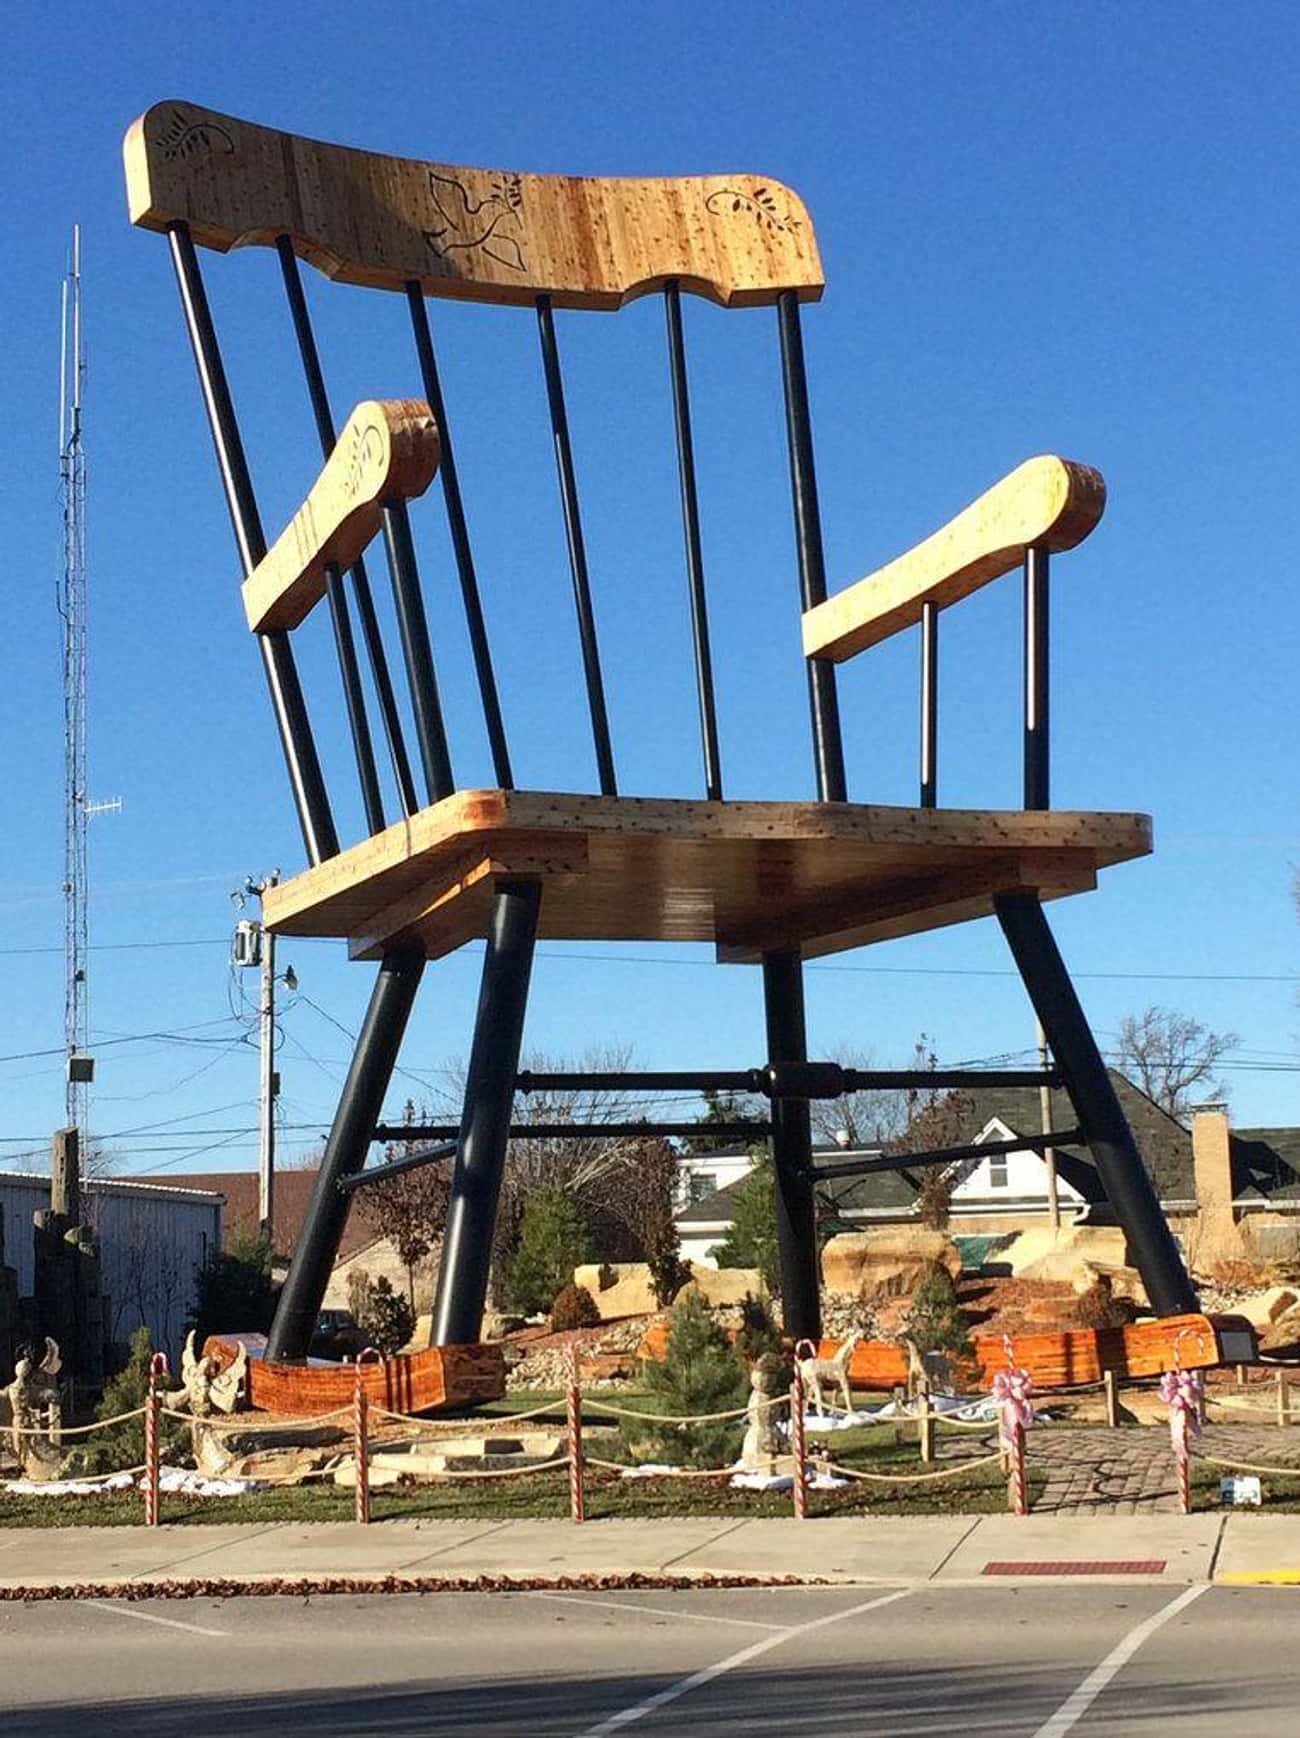 World's Largest Rocking Chair, Casey, IL